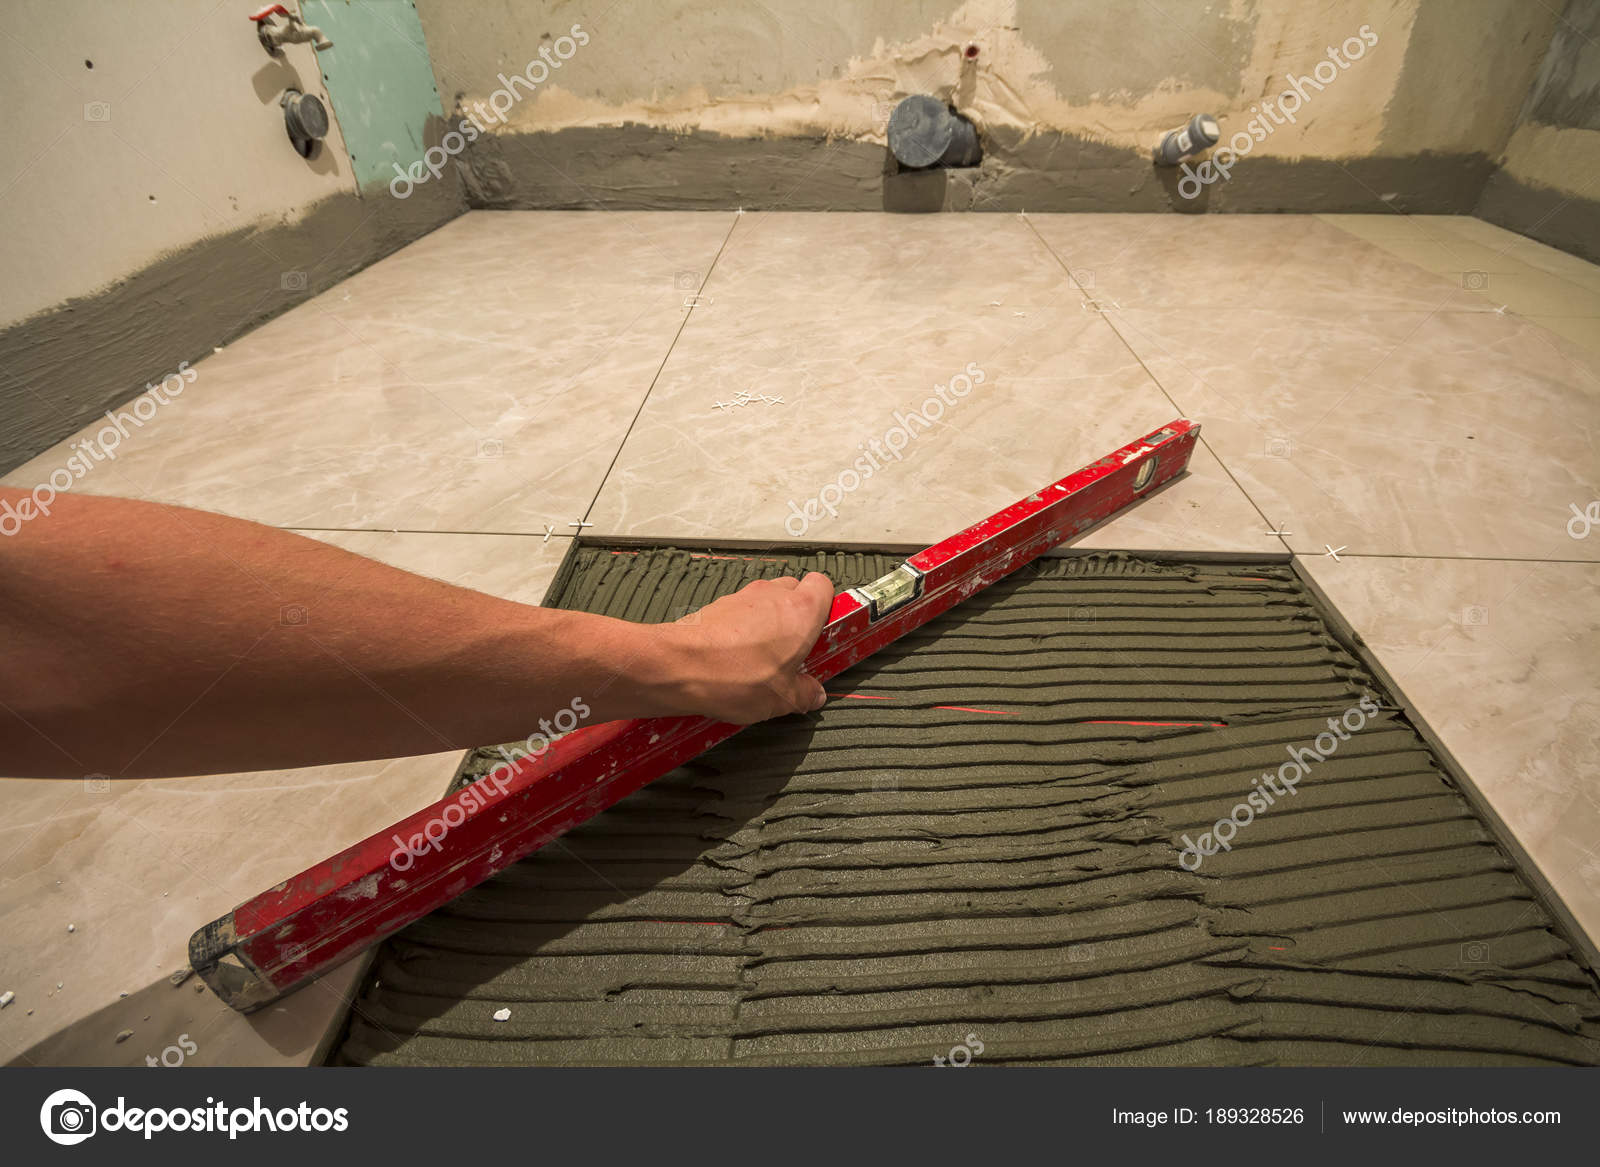 Ceramic Tile Floor Adhesive Mortar, How To Level A Tile Floor